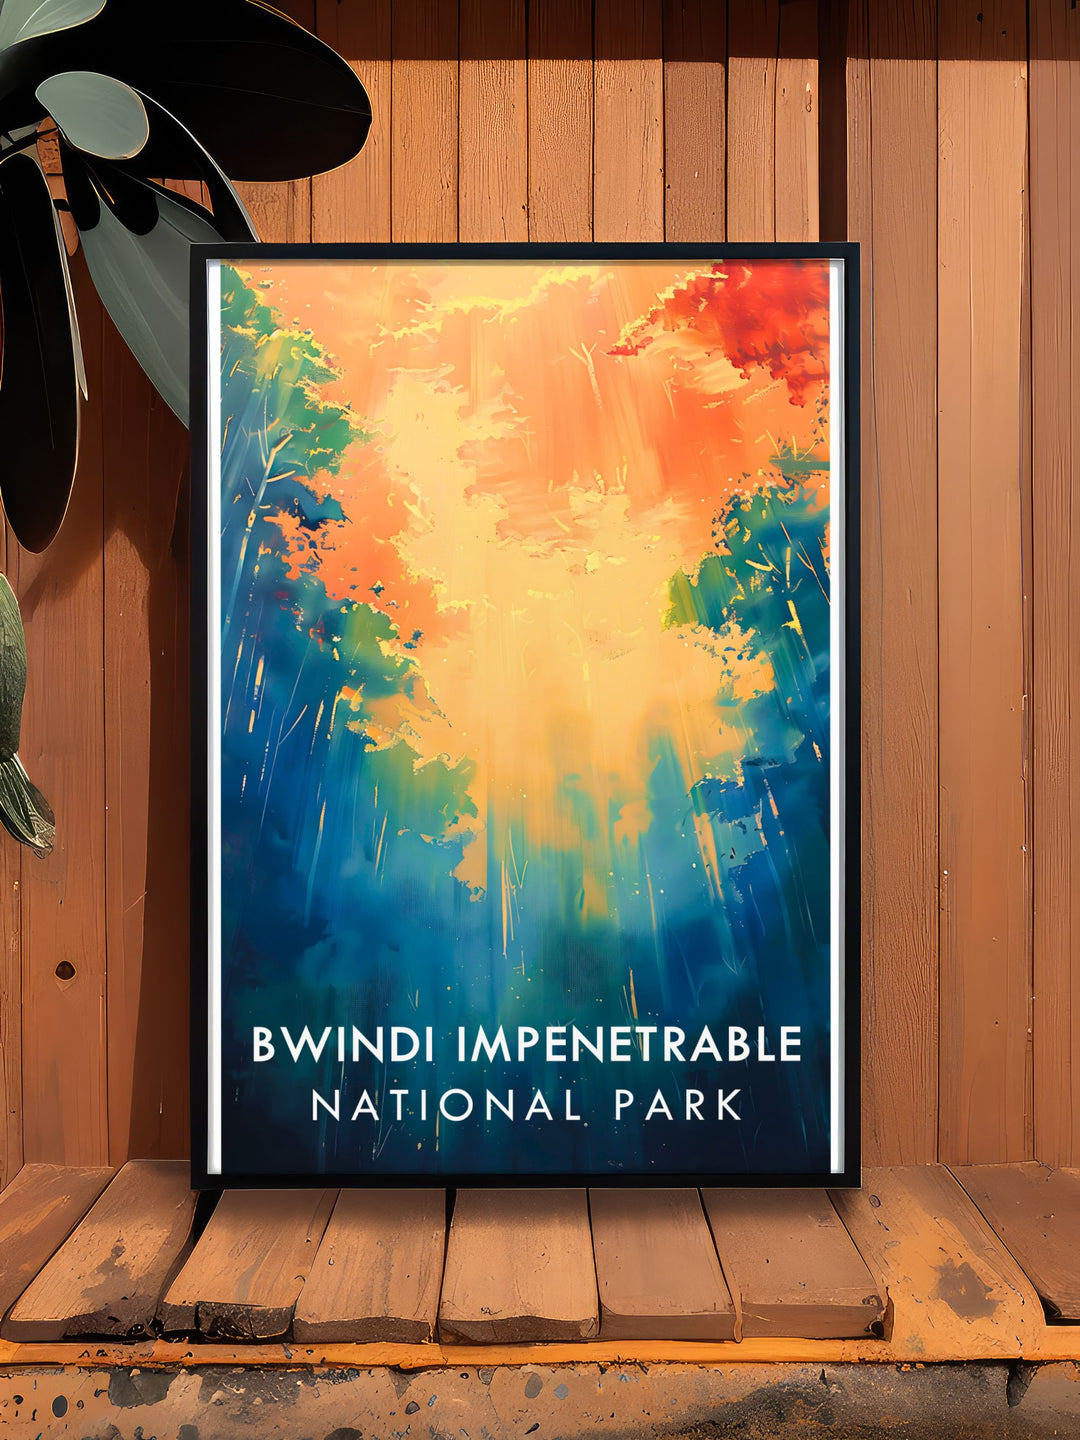 Featuring the expansive views and unique wildlife of Bwindi, this travel poster captures the essence of Ugandas natural beauty, perfect for those who appreciate outdoor adventures and conservation.